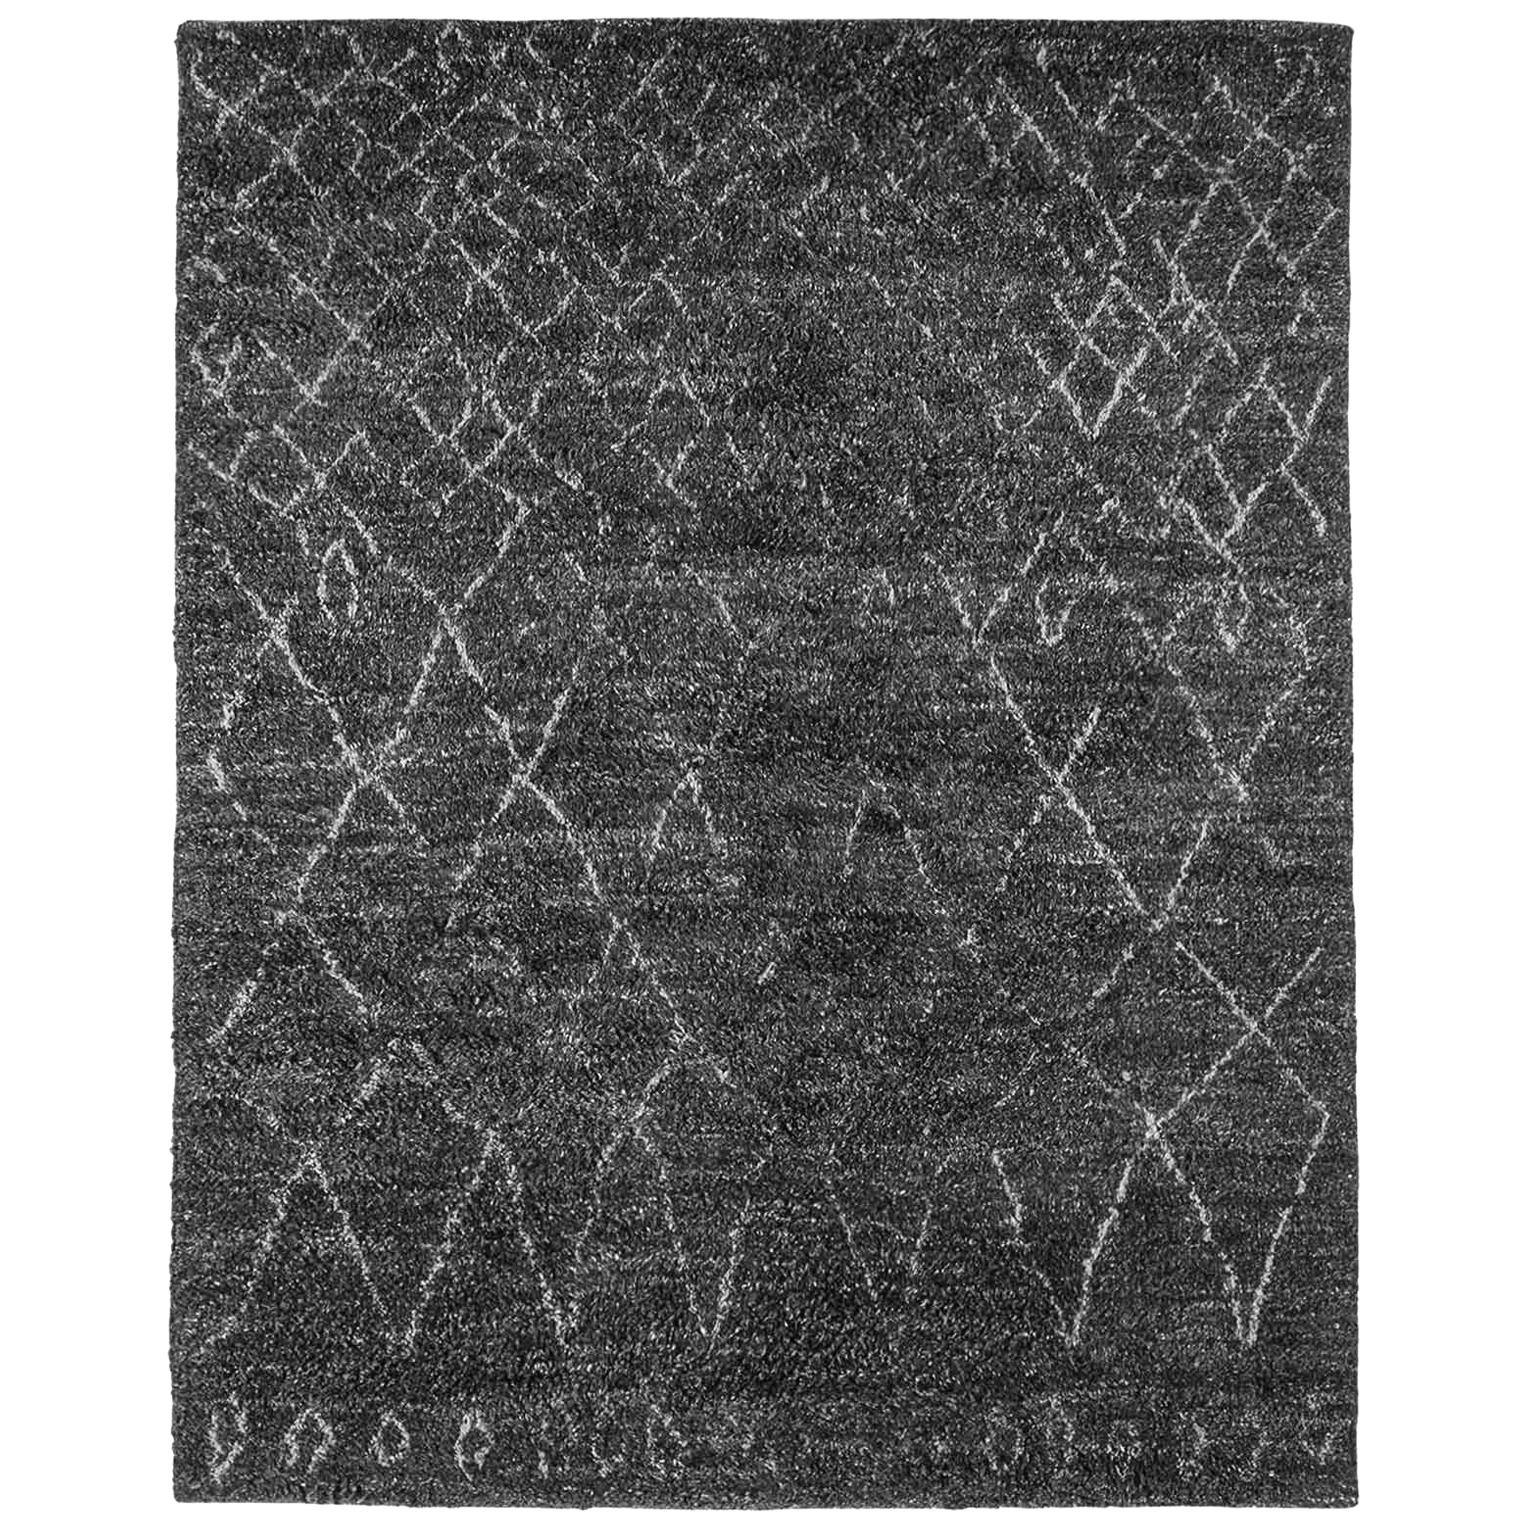 For Sale: Black (Graphite/Charcoal) Ben Soleimani Performance Elda Rug– Moroccan Hand-knotted Charcoal 6'x9'